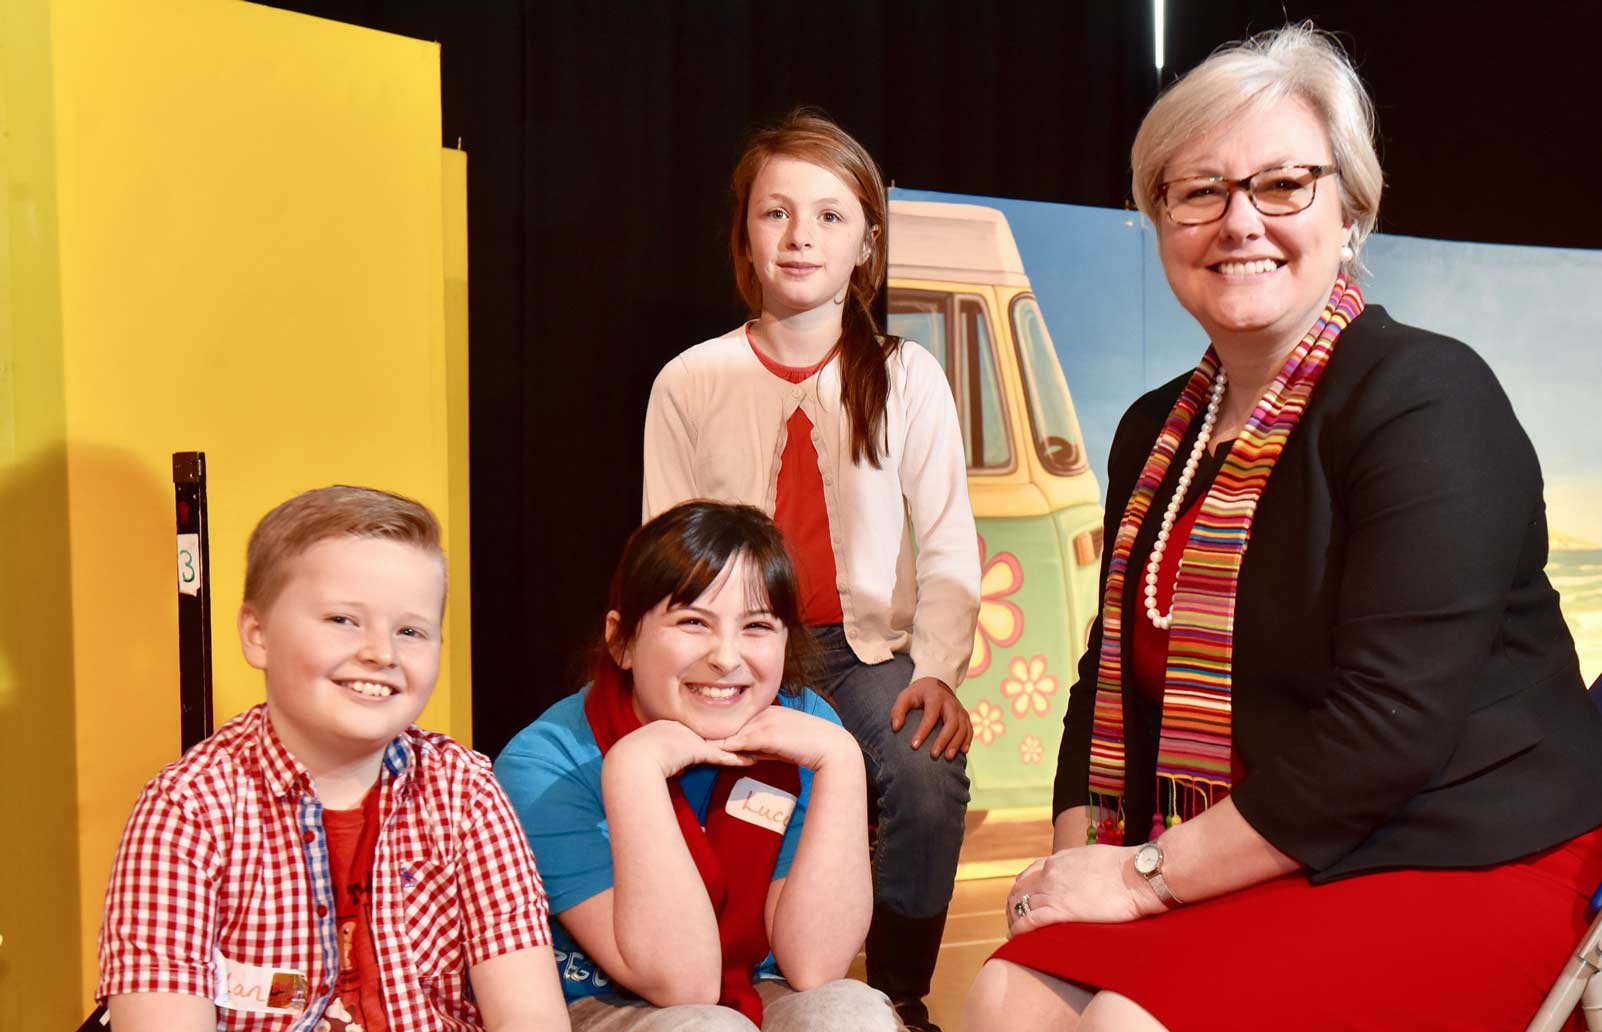 Principal of GSAL Sue Woodroofe is pictured with (L-R): Dylan Wintersgill, Lucie Fitzpatrick and Evie Williamson from Scotton Lingerfield Primary School